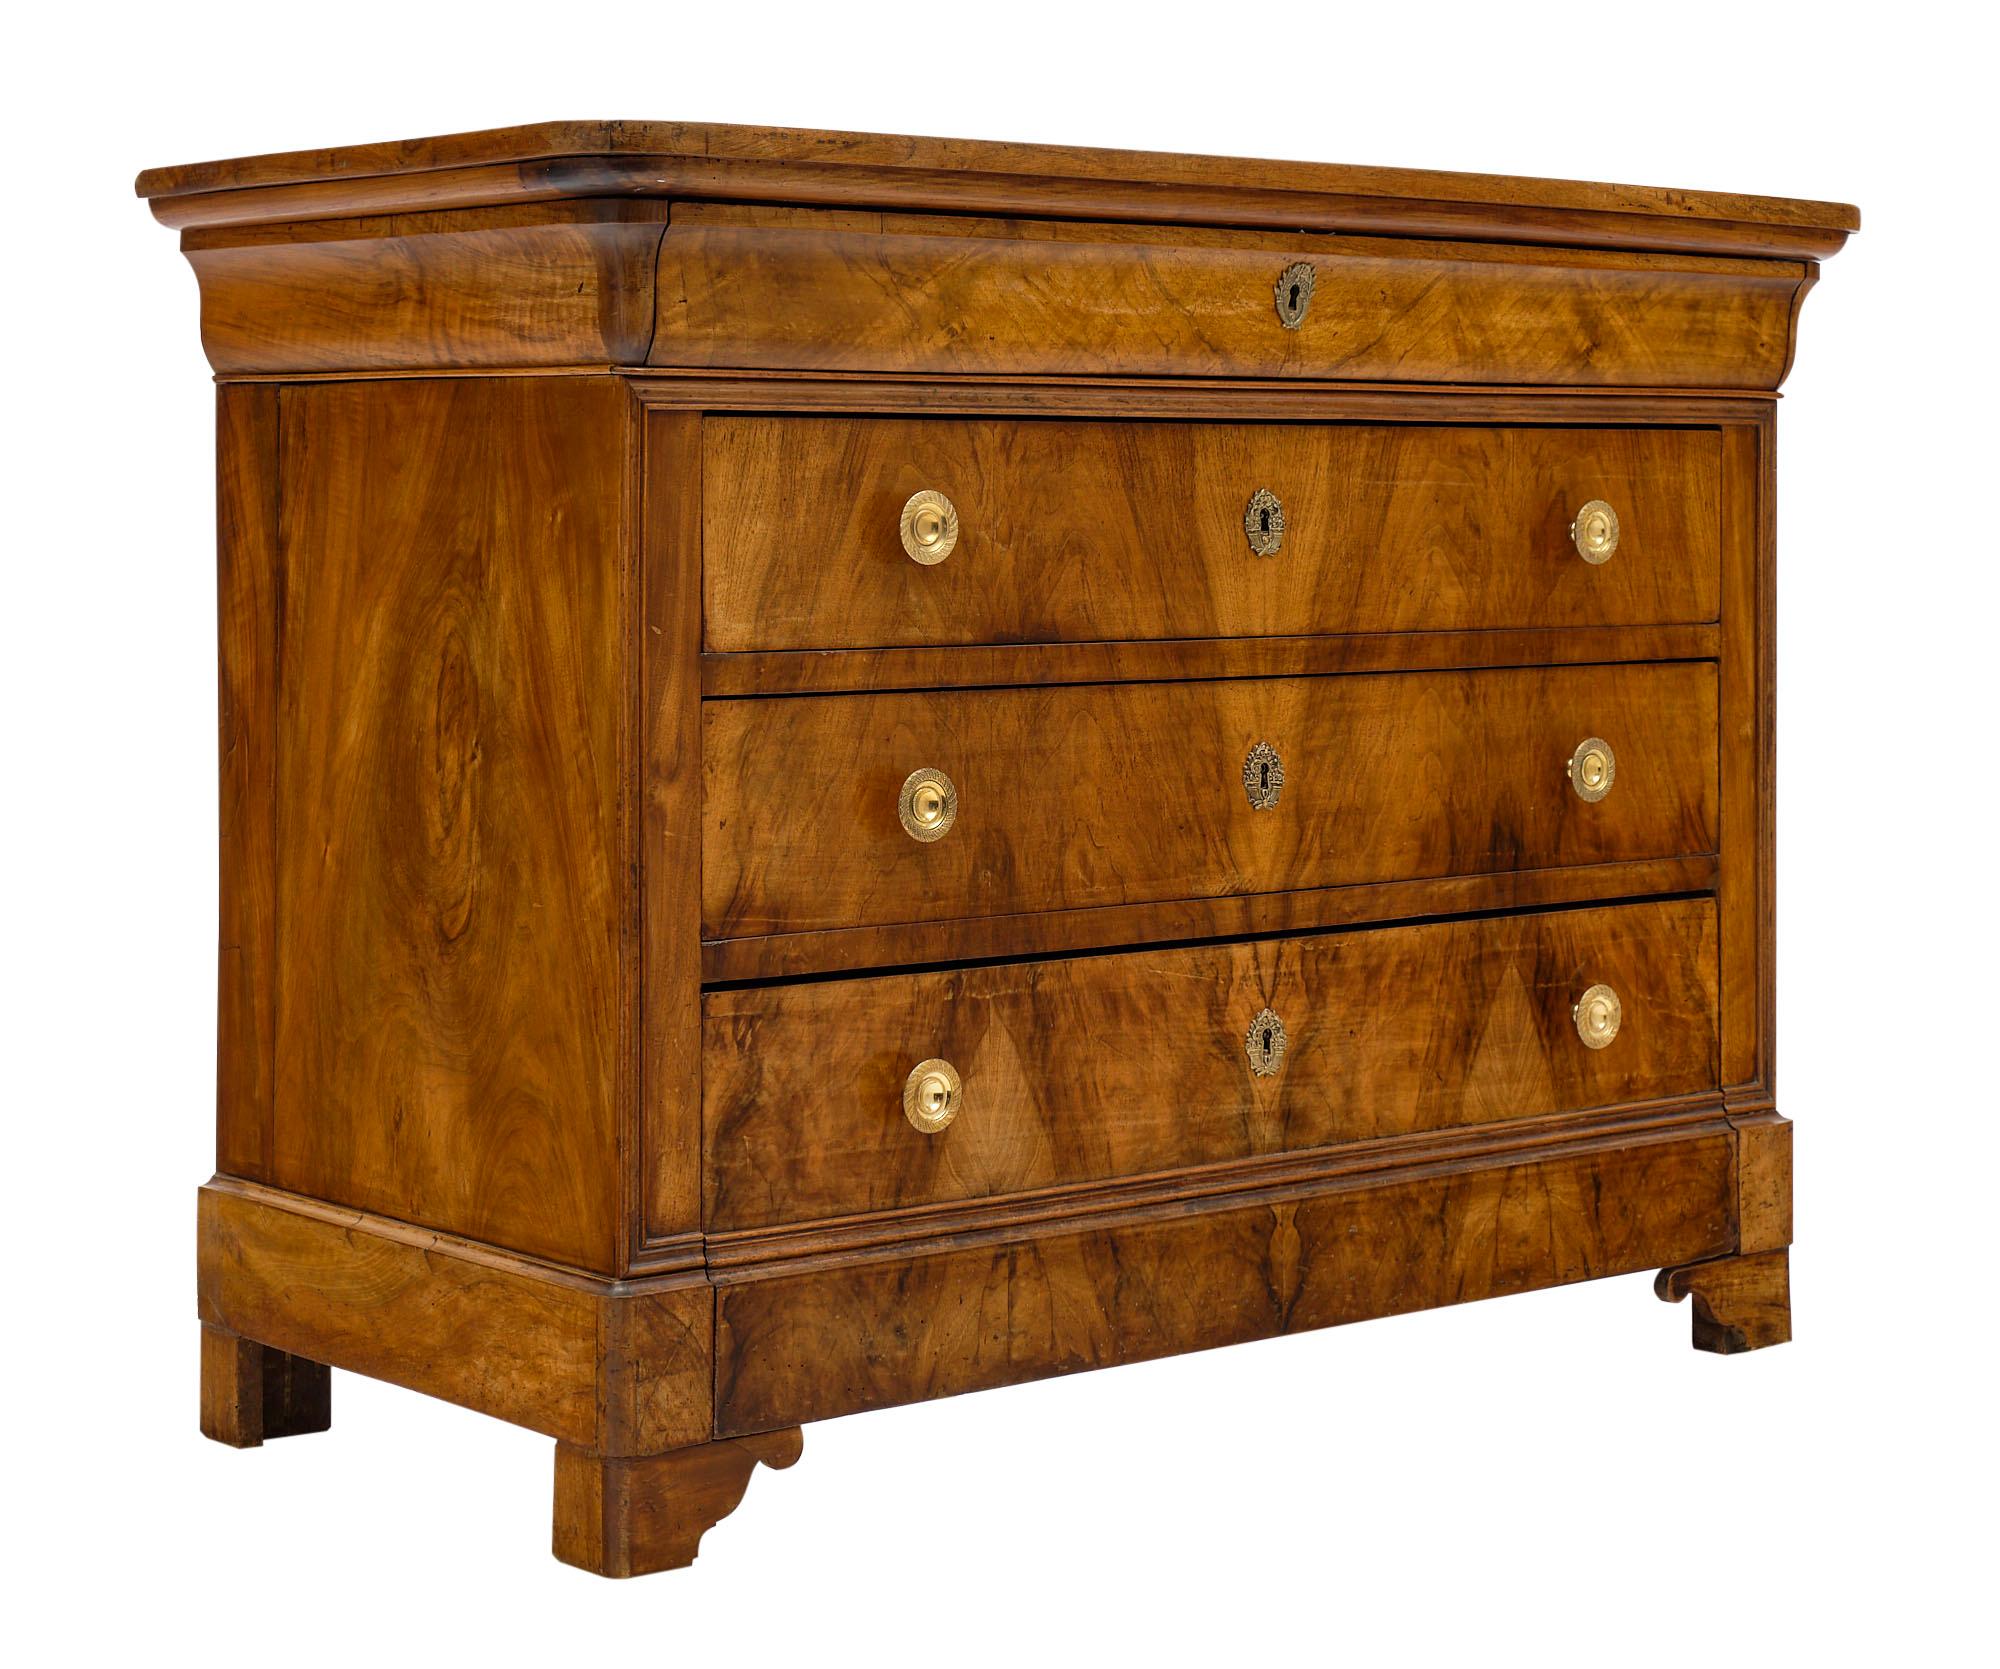 Louis Philippe antique French chest of drawers or “commode” made of solid blond walnut from the Rhone valley. The craftsmanship combines the burled and figured walnut for beautiful decorative impact. There are four dovetailed drawers to provide